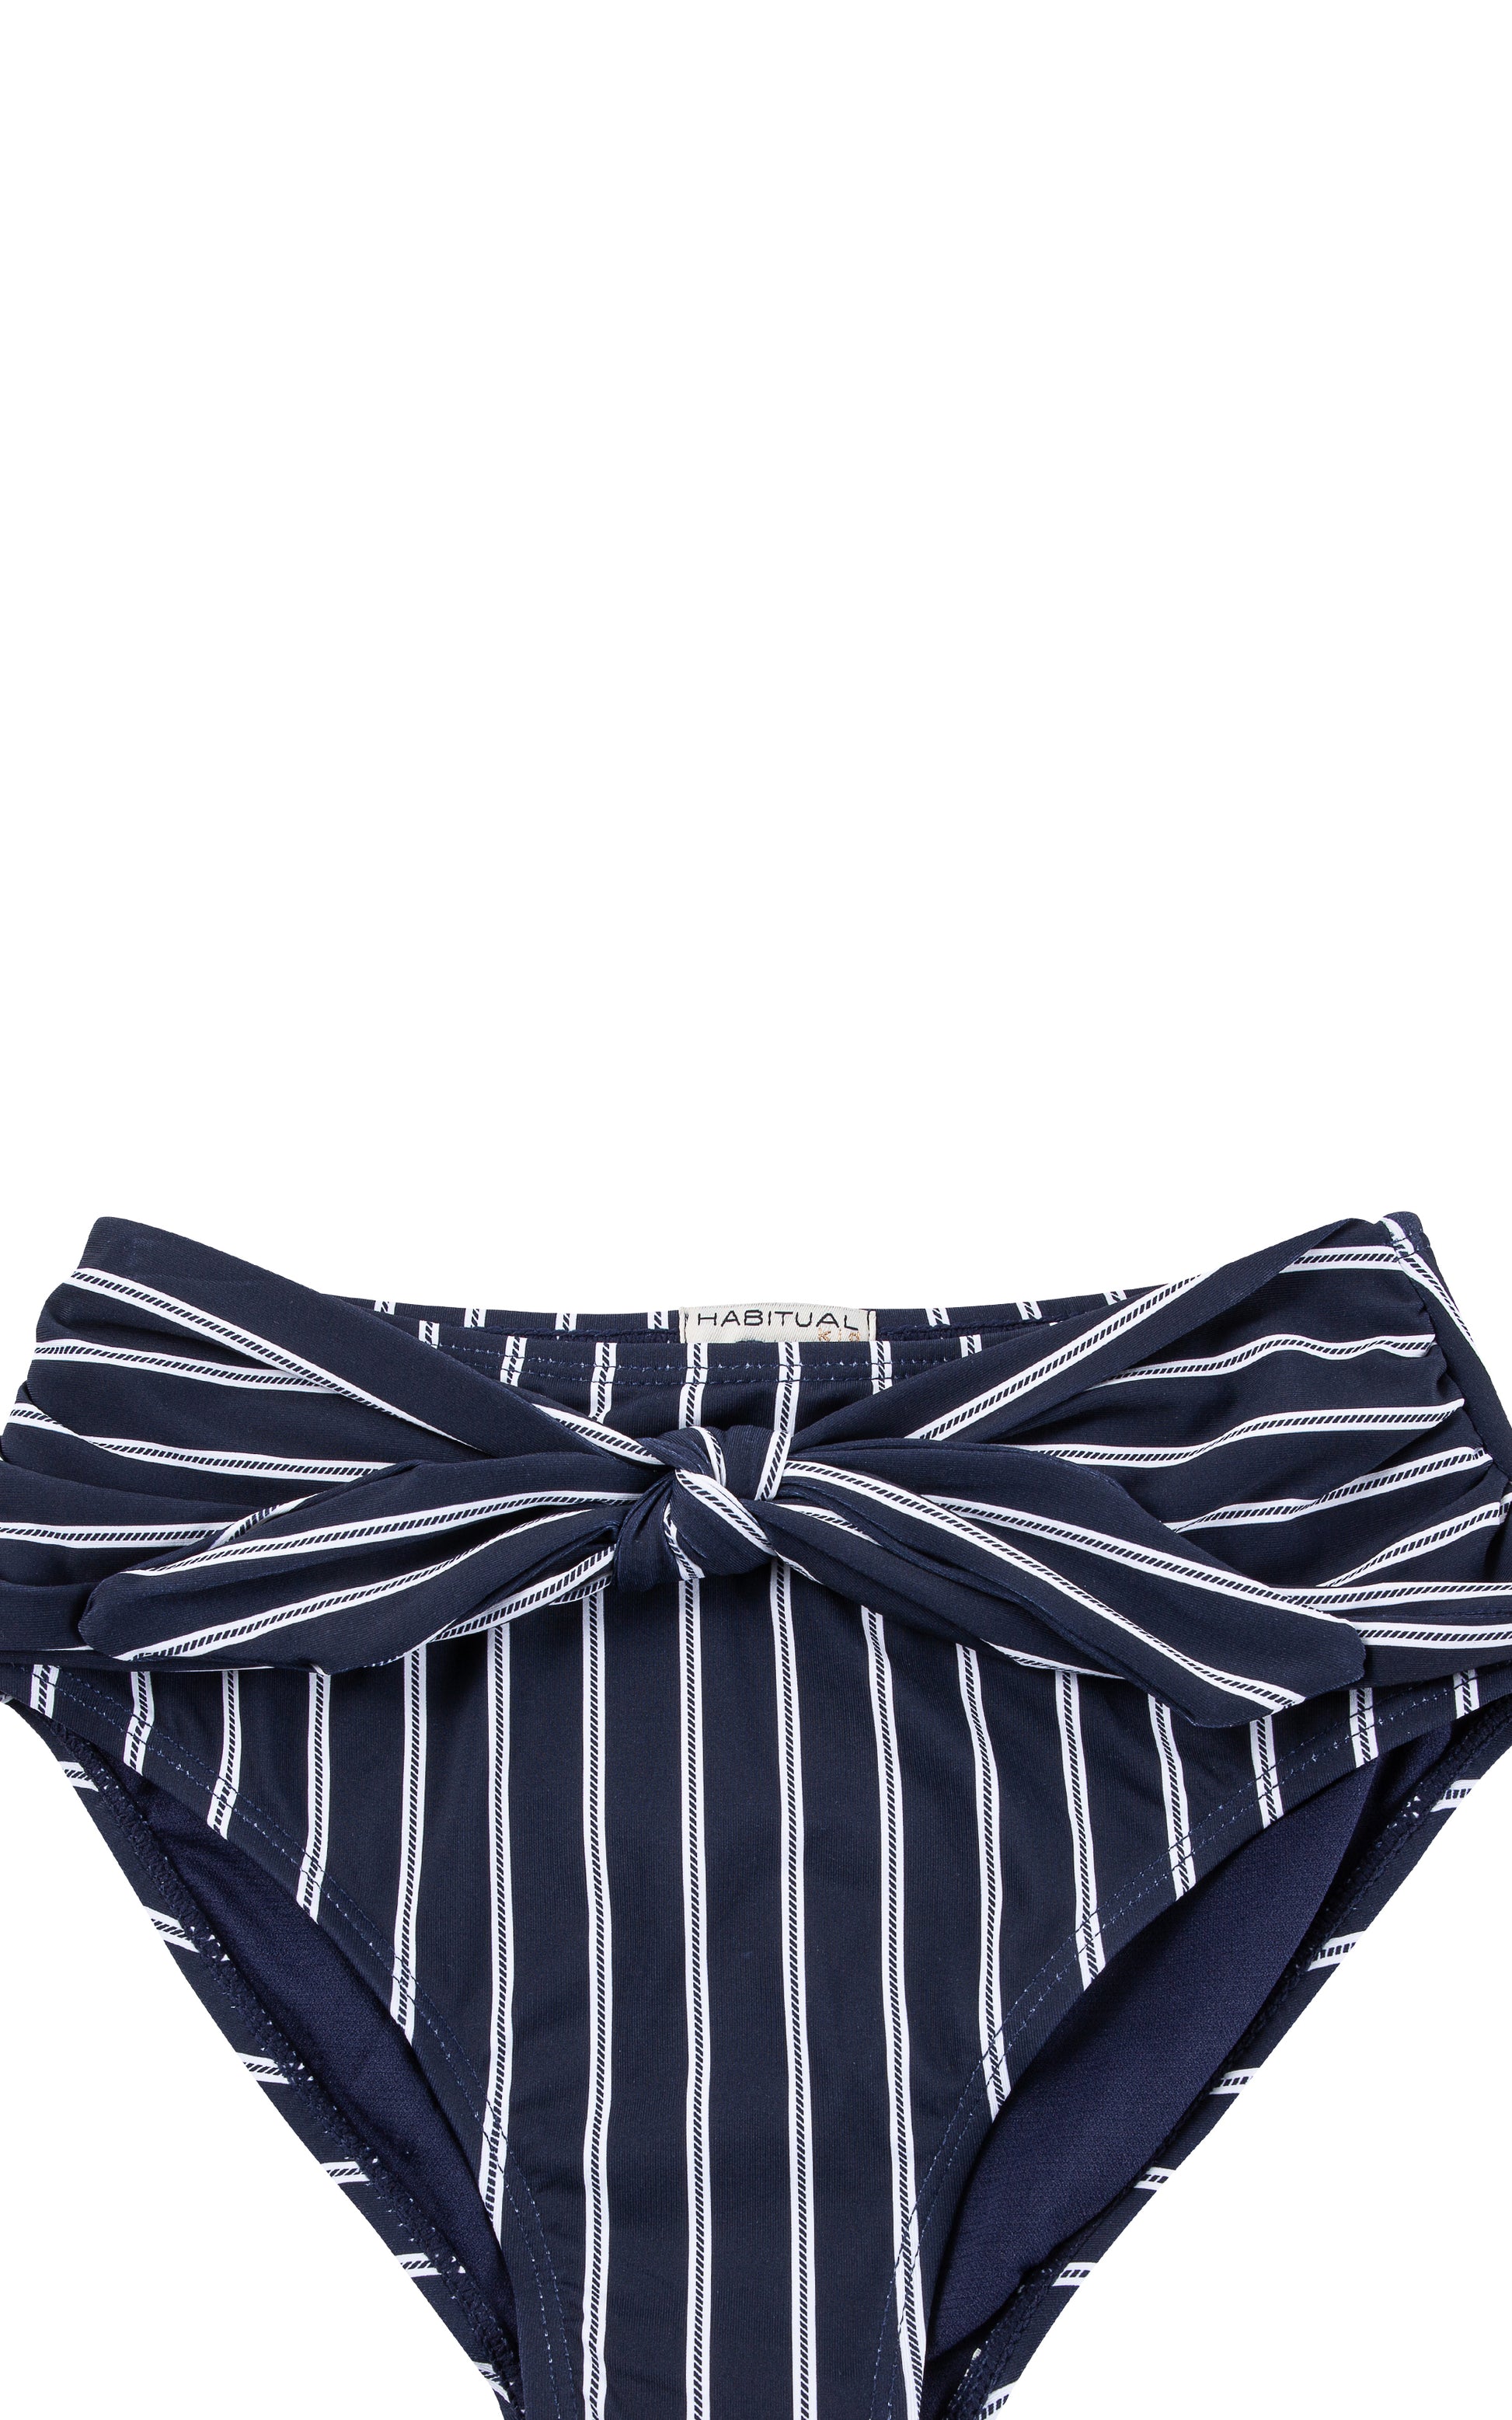 Close up of navy bottom with white stripes